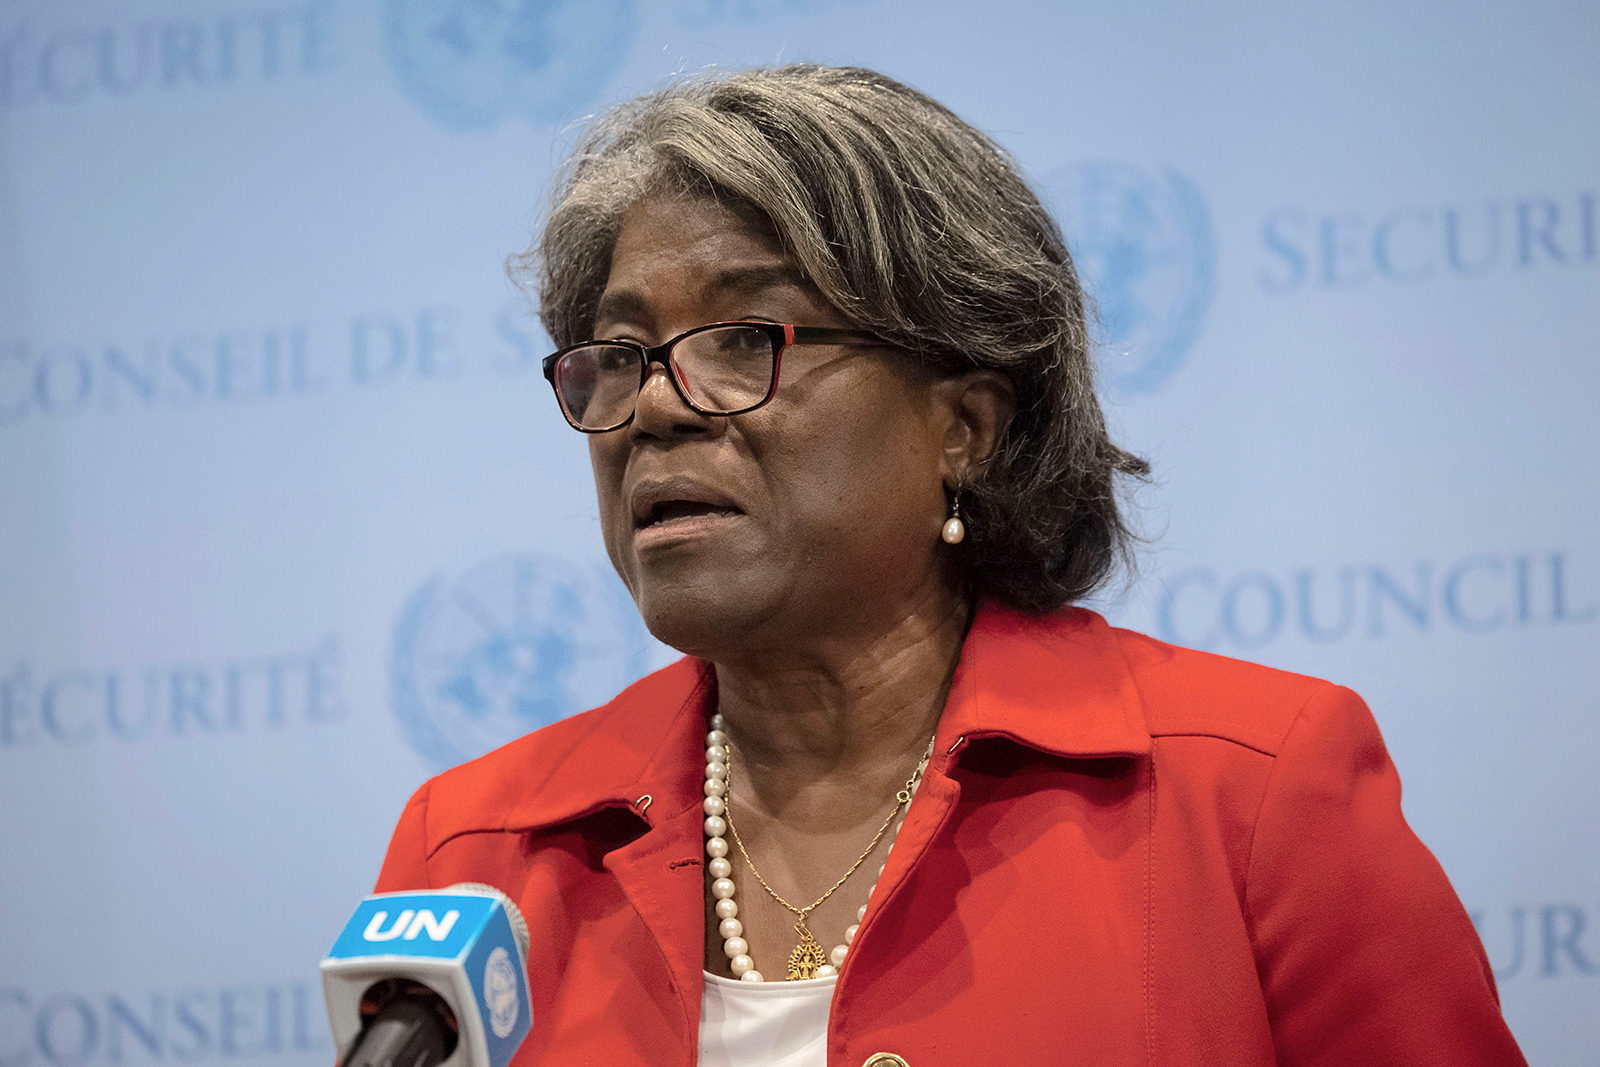 U.S. Representative to the United Nations Linda Thomas-Greenfield speaks during a press conference, in the United Nations Security Council, on Wednesday, September 7.